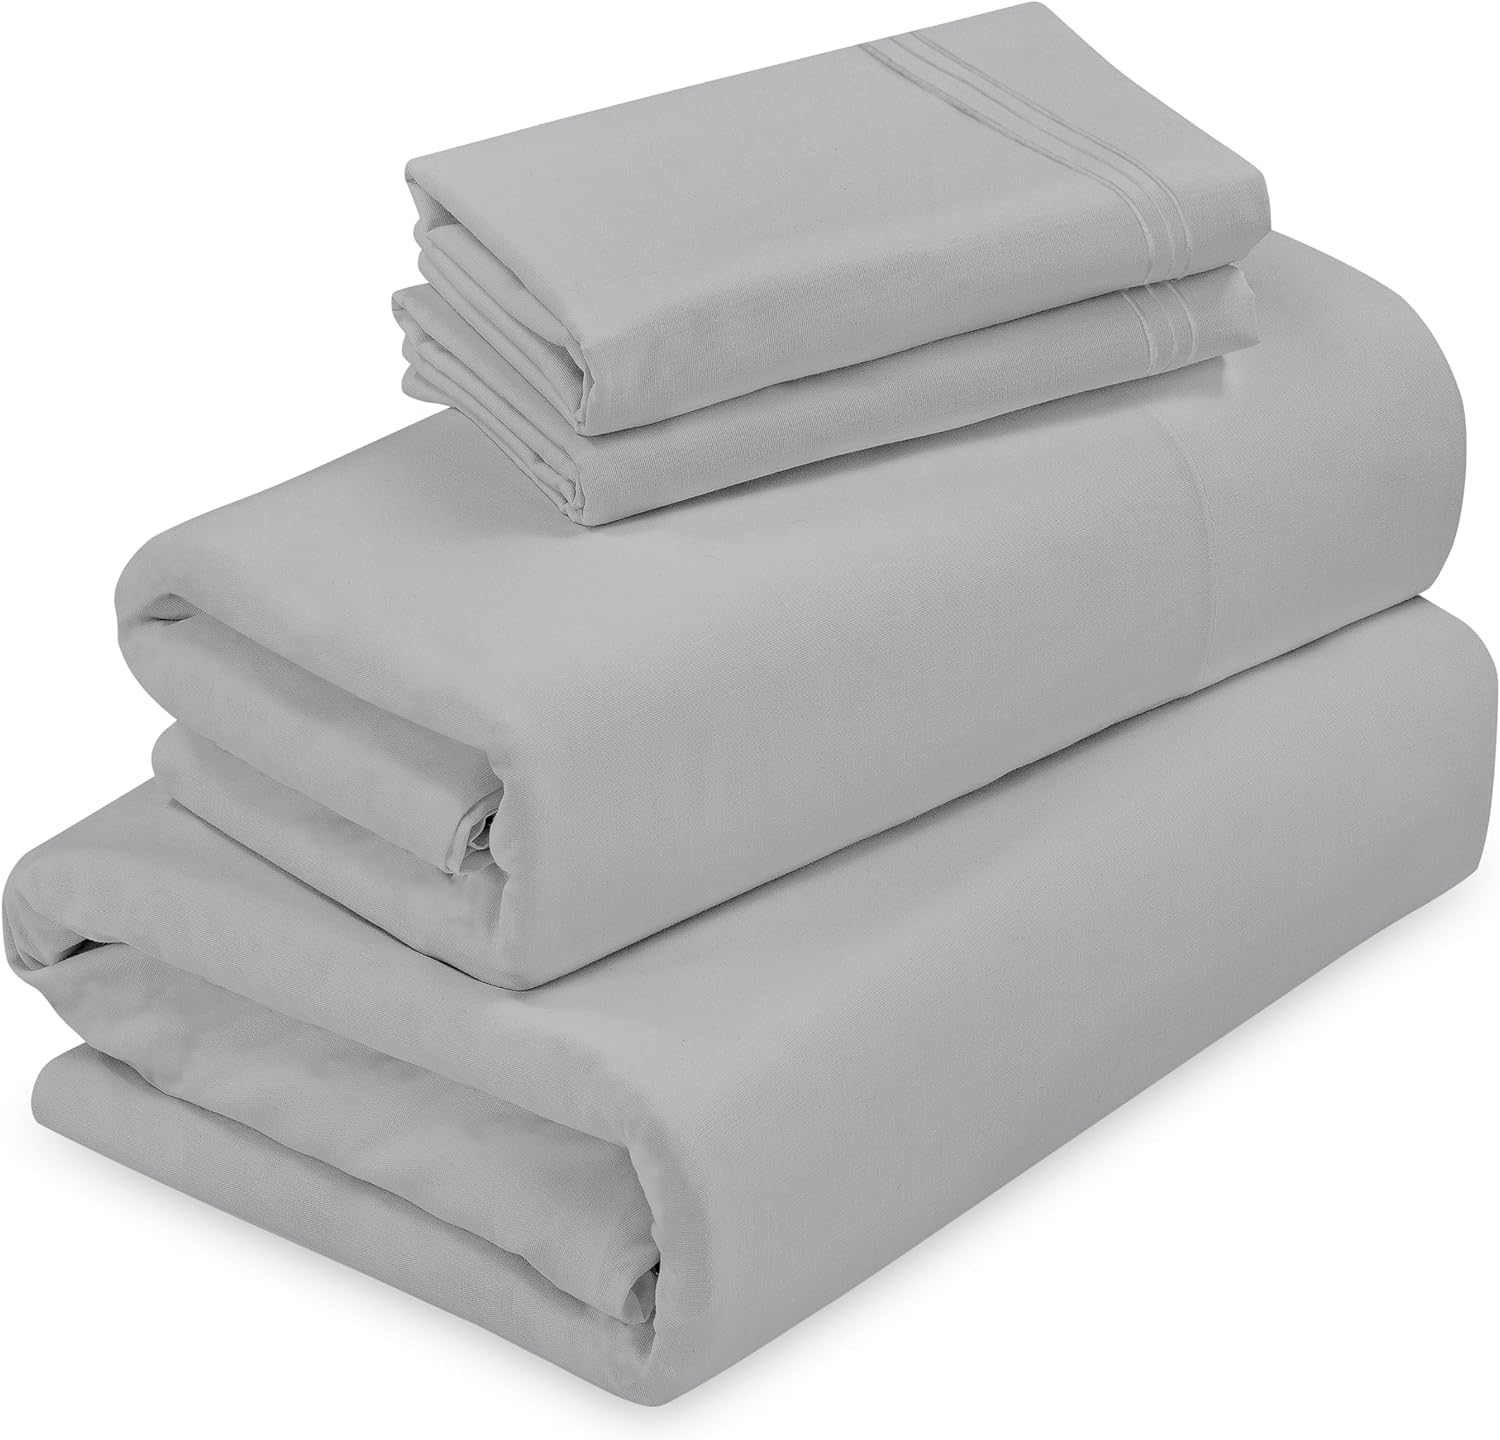 ROYALE LINENS - 4 Piece Queen Bed Sheet - Soft Brushed Microfiber 1800 Bedding Set - 1 Fitted Sheet, 1 Flat Sheet, 2 Pillow Cases - Wrinkle & Fade Resistant Luxury Queen Size Sheet Set (Queen, Silver)